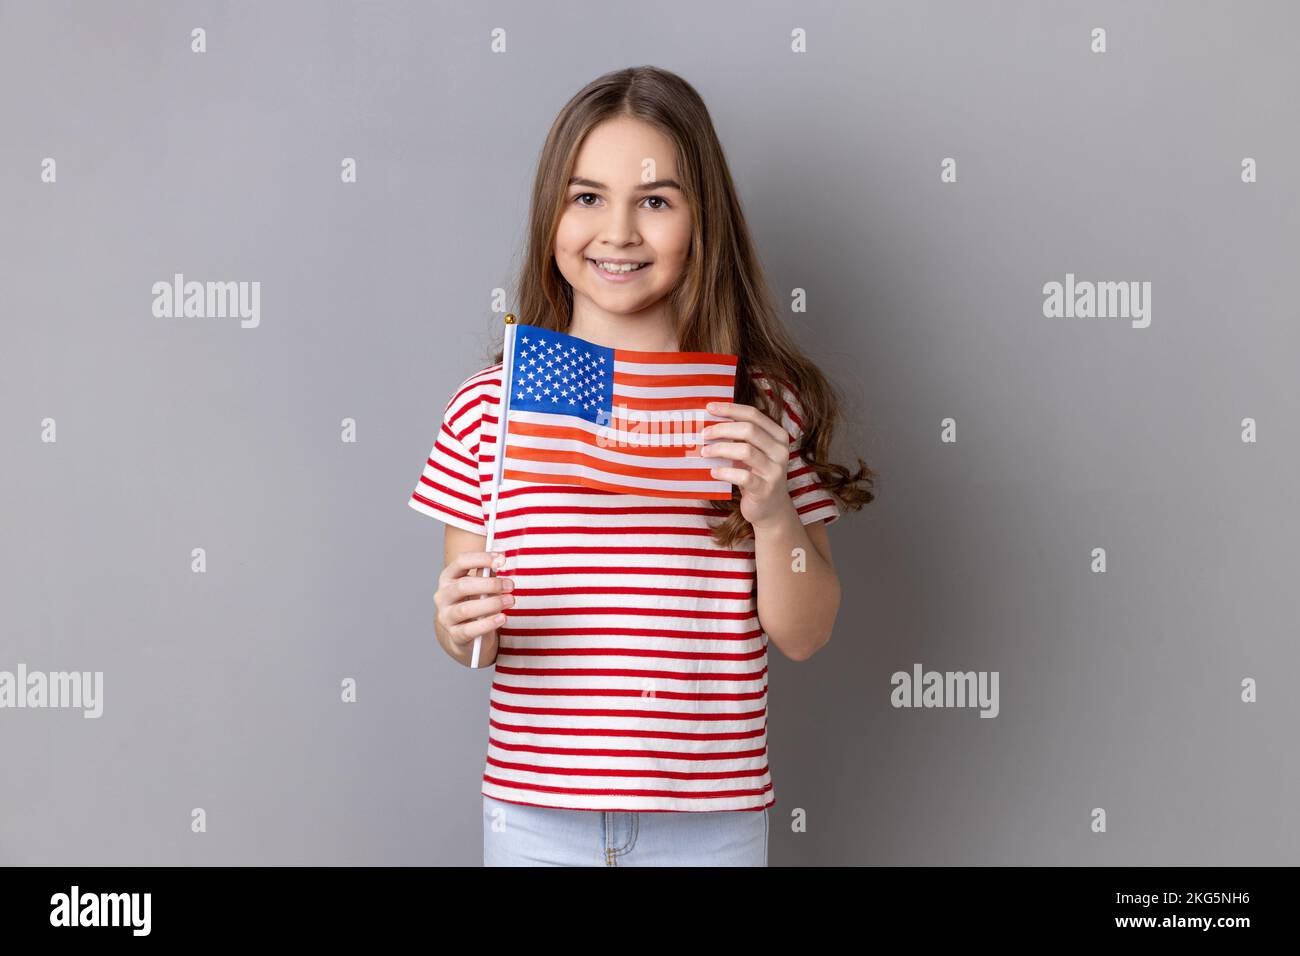 American flag. Portrait of delighted happy adorable cute little girl wearing striped T-shirt holding flag of United States of America, looking at camera. Indoor studio shot isolated on gray background Stock Photo